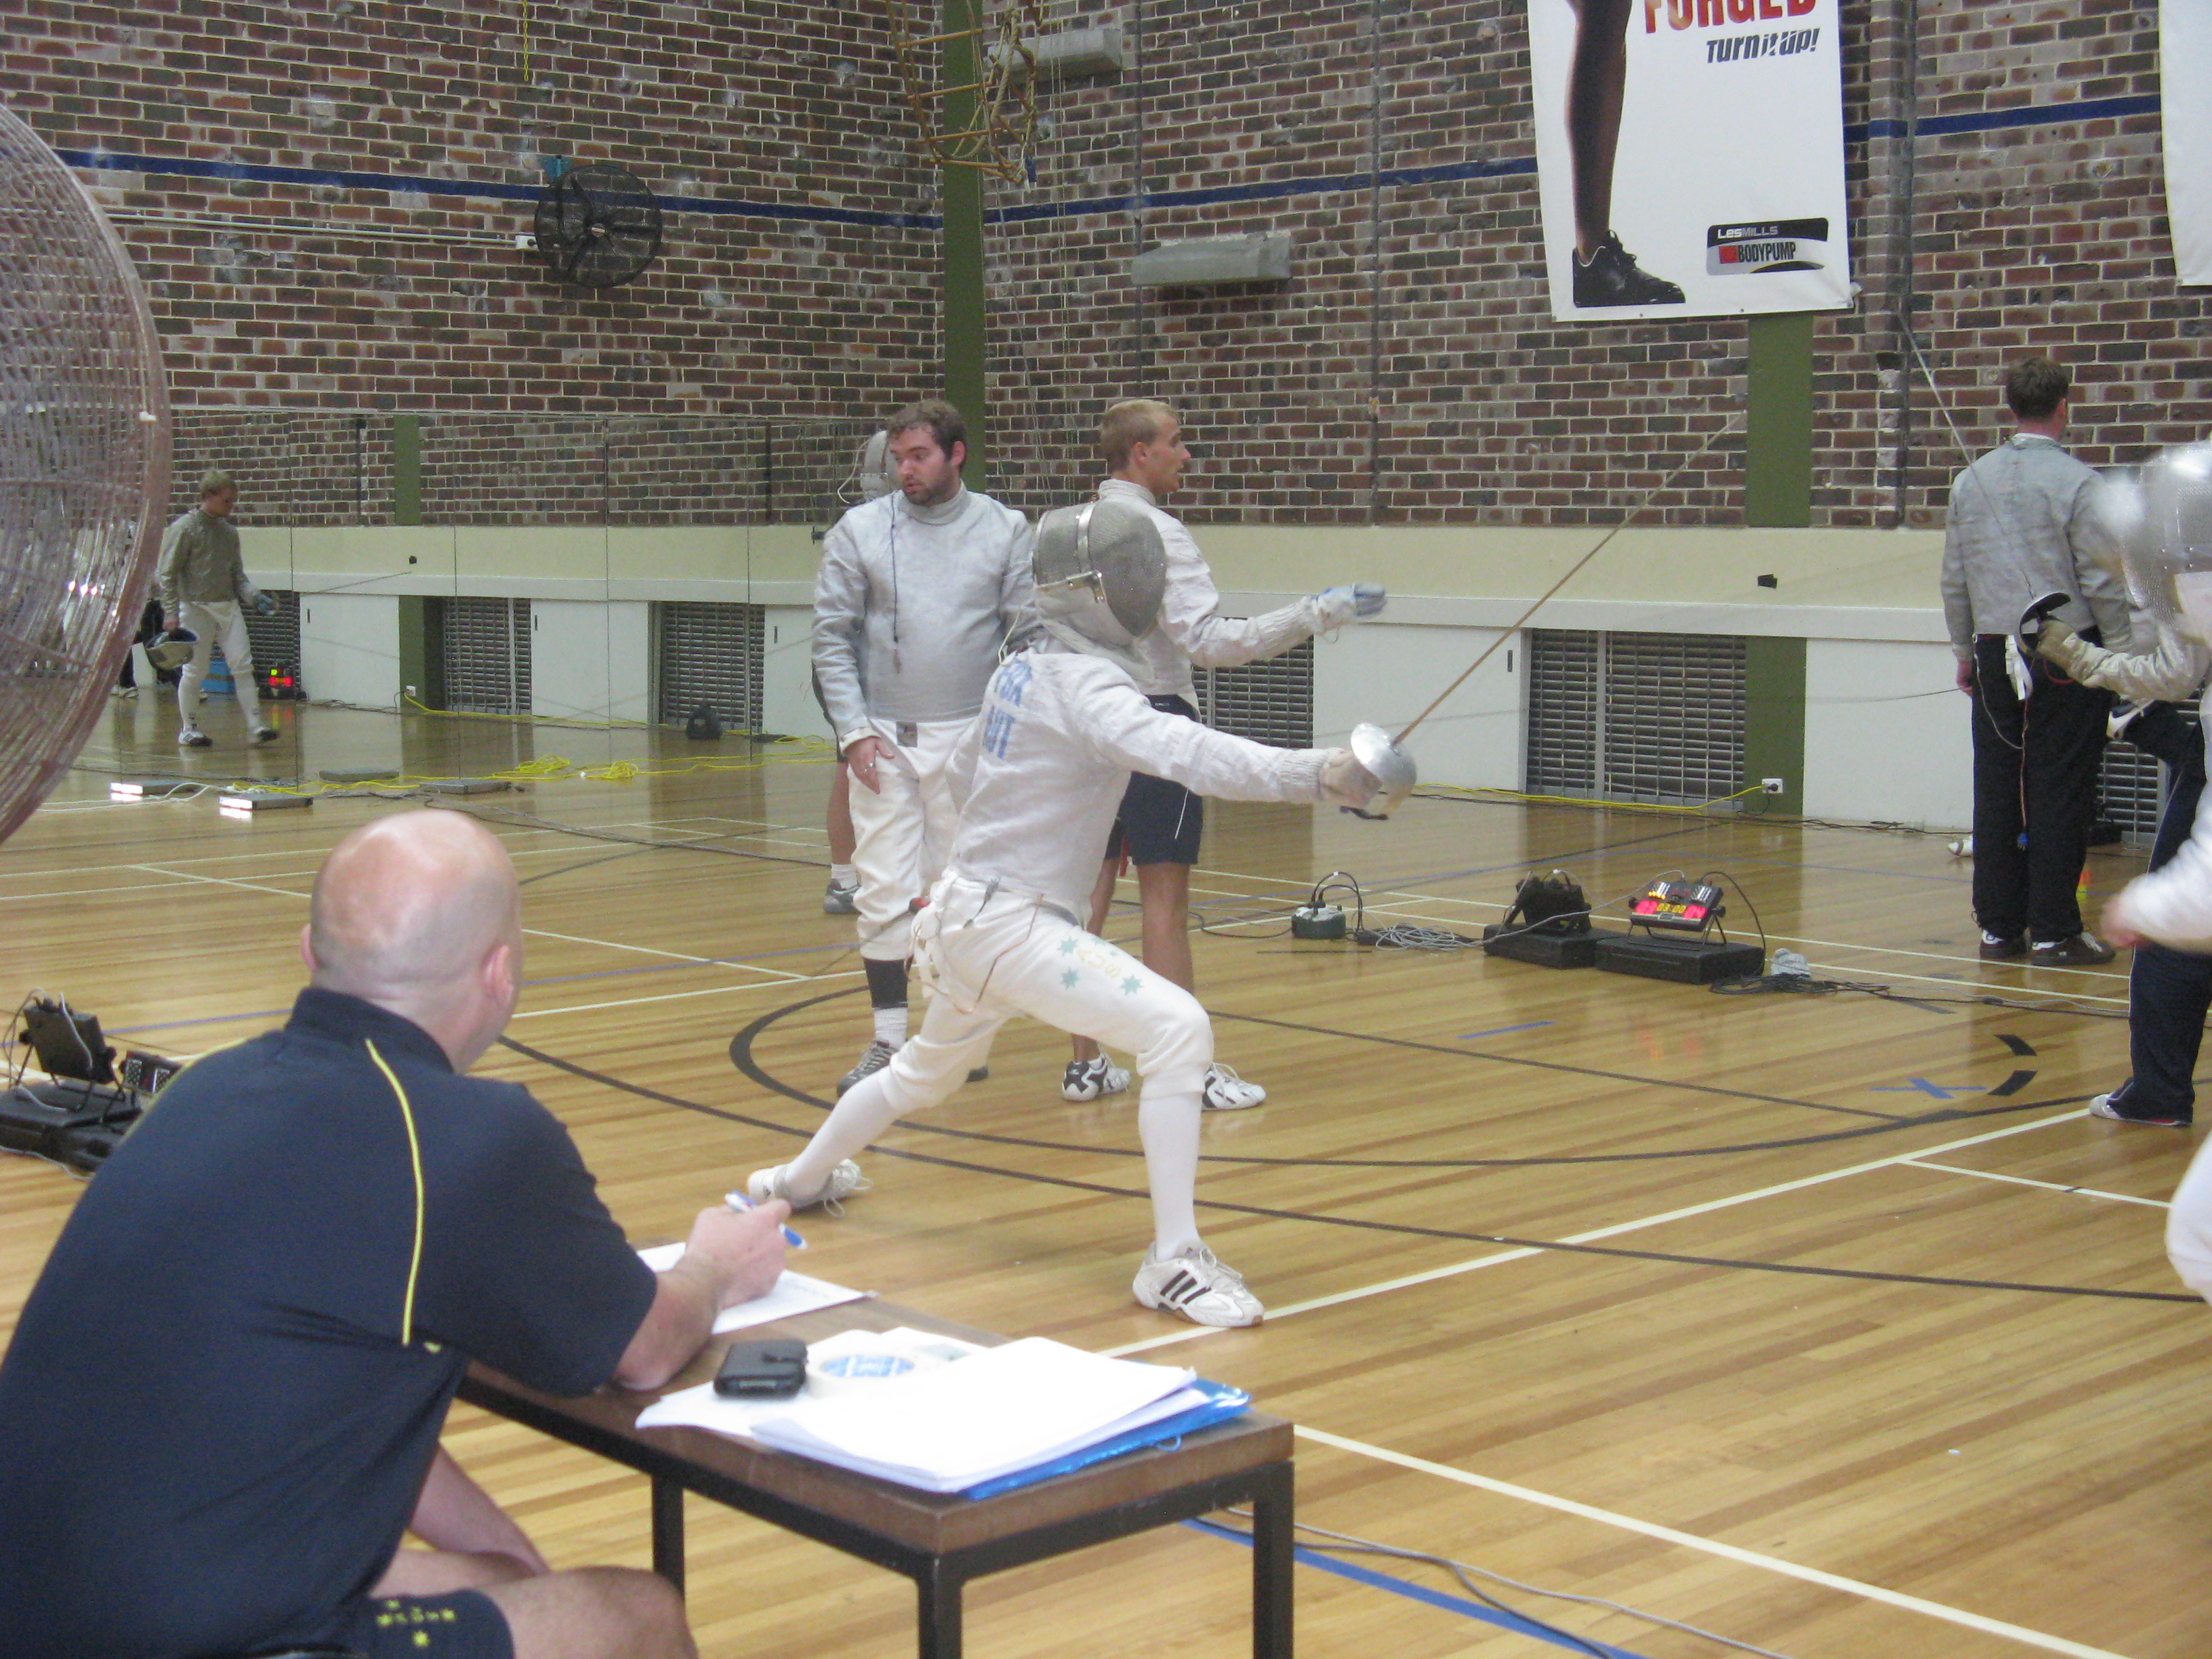 David Ehrlich Fencing with Sabre in Middle of Picture